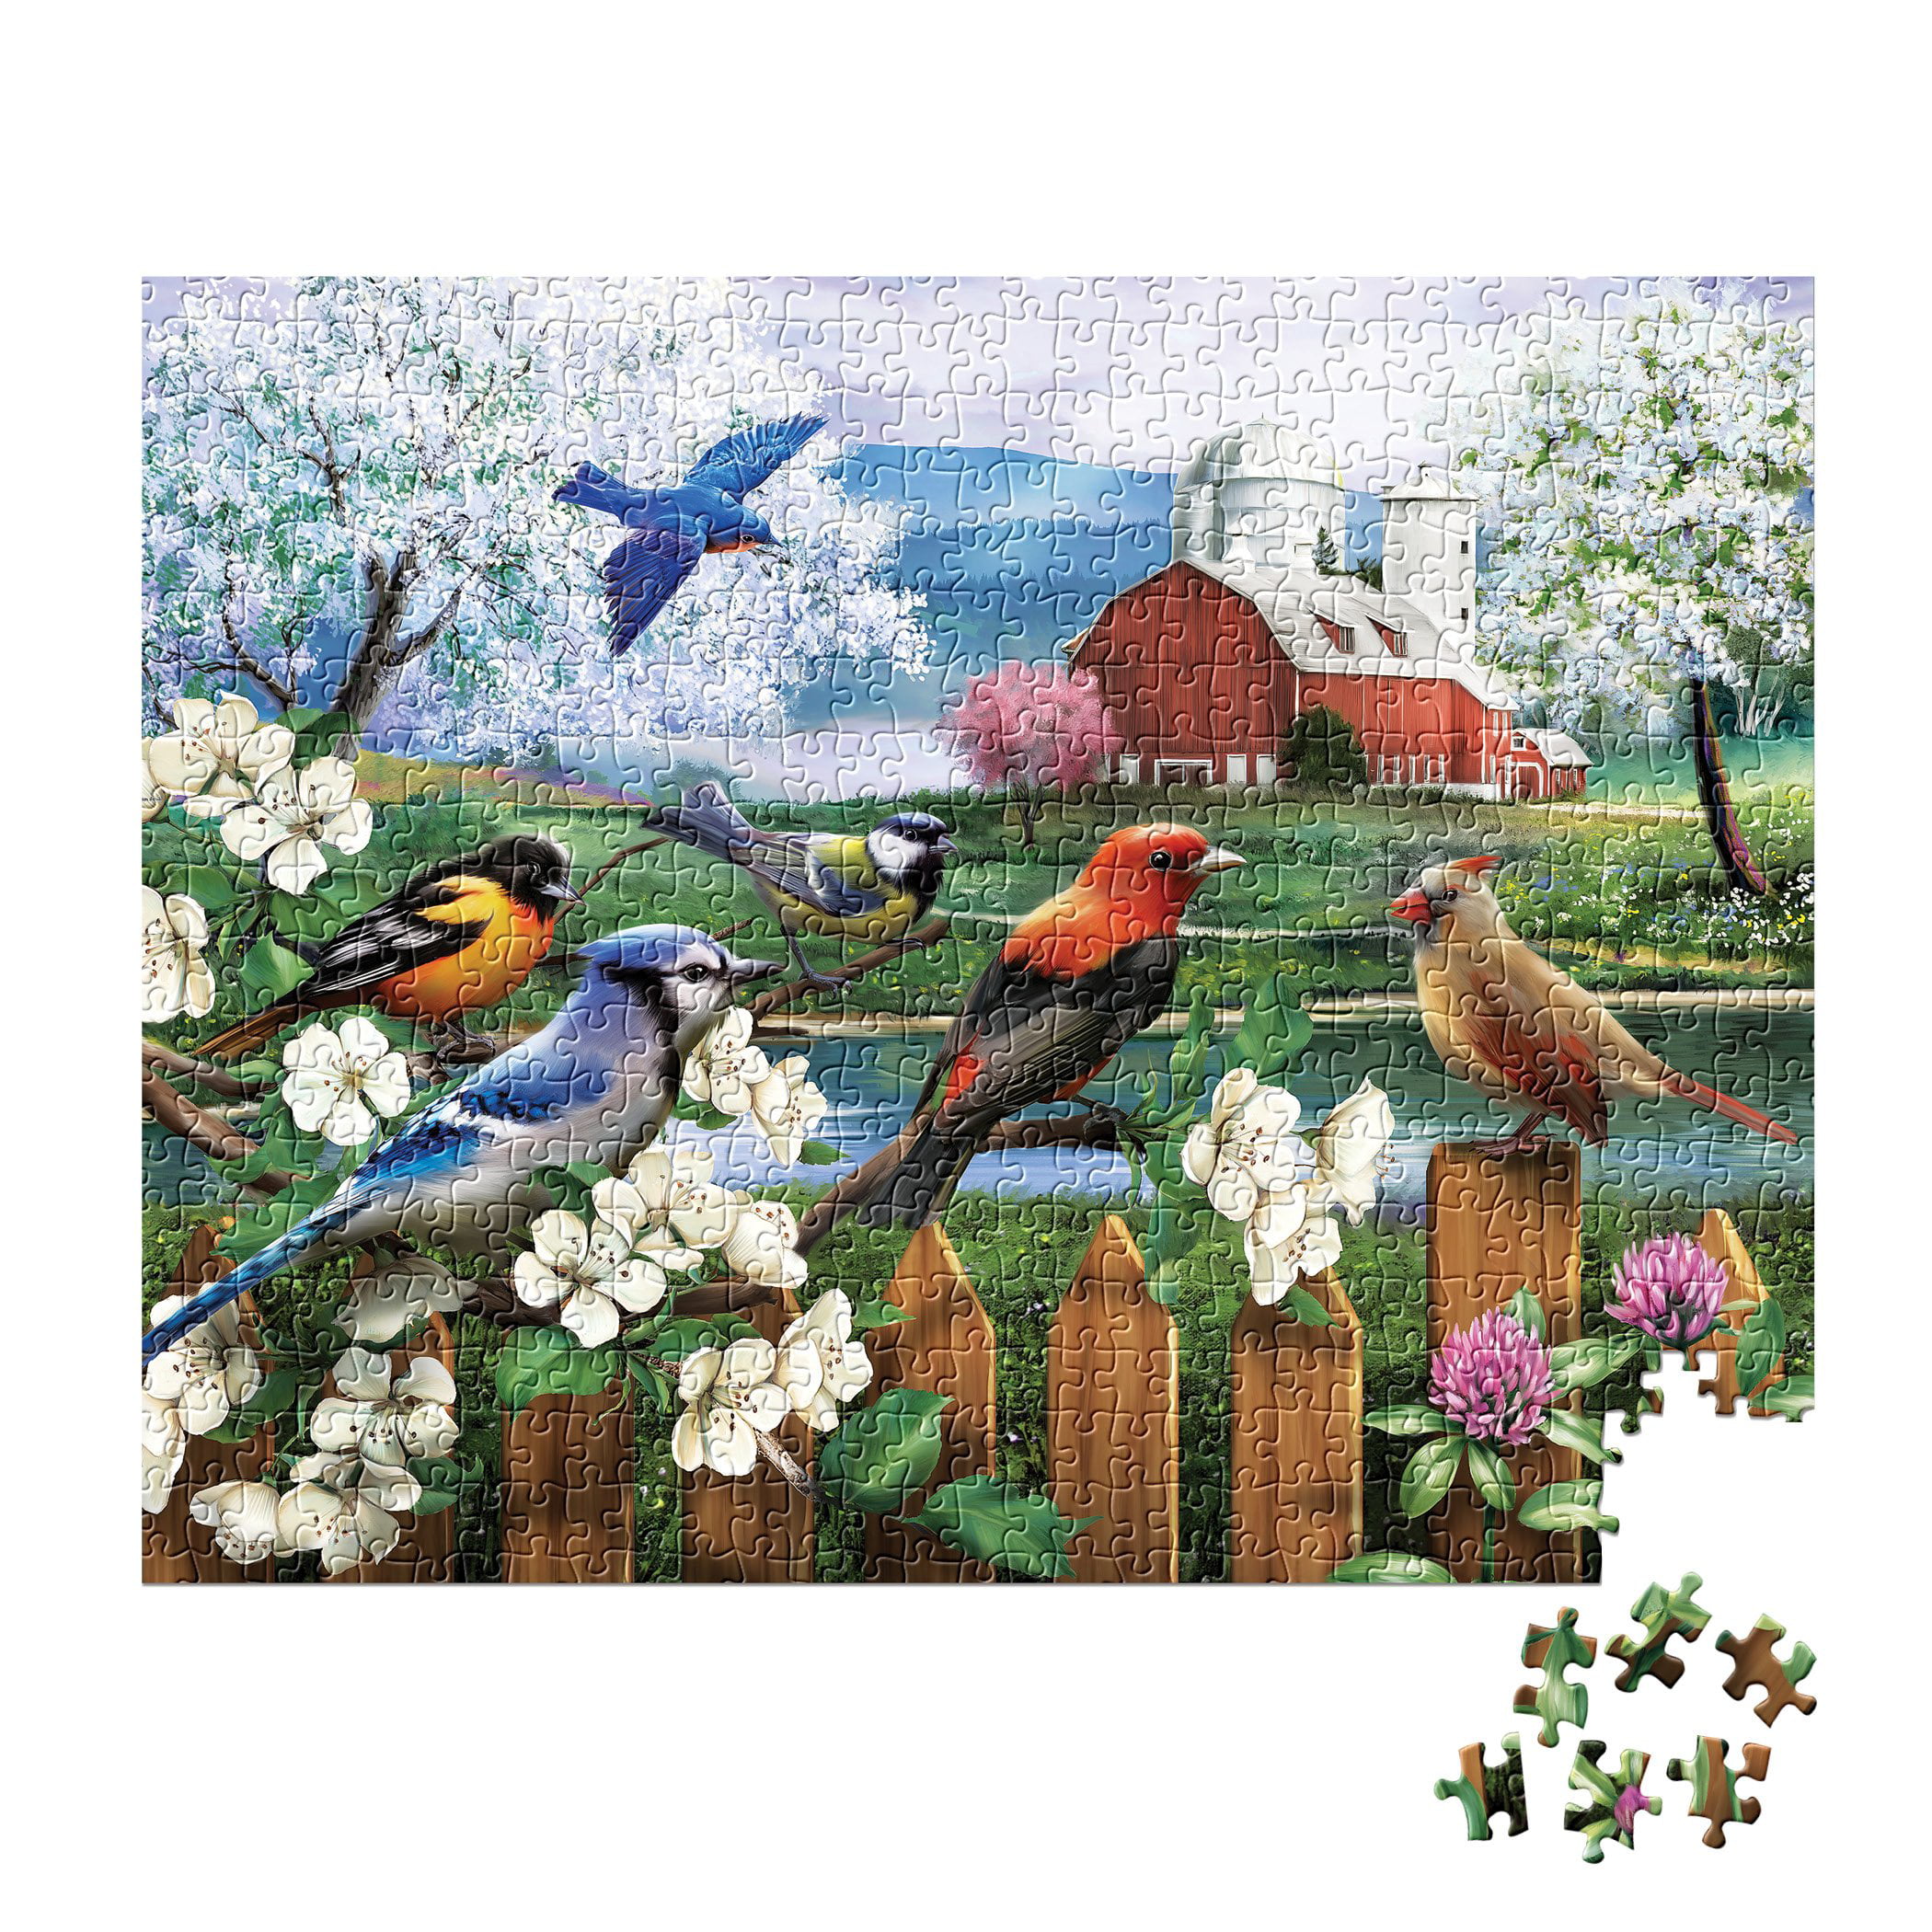 Entertainment Toys for Creative Gift Home Decor Scenery Landscape Jigsaw Puzzles Classic Puzzle 6000 Pieces for Adults-Flying Eagle-Wooden Jigsaw Puzzles for Adults